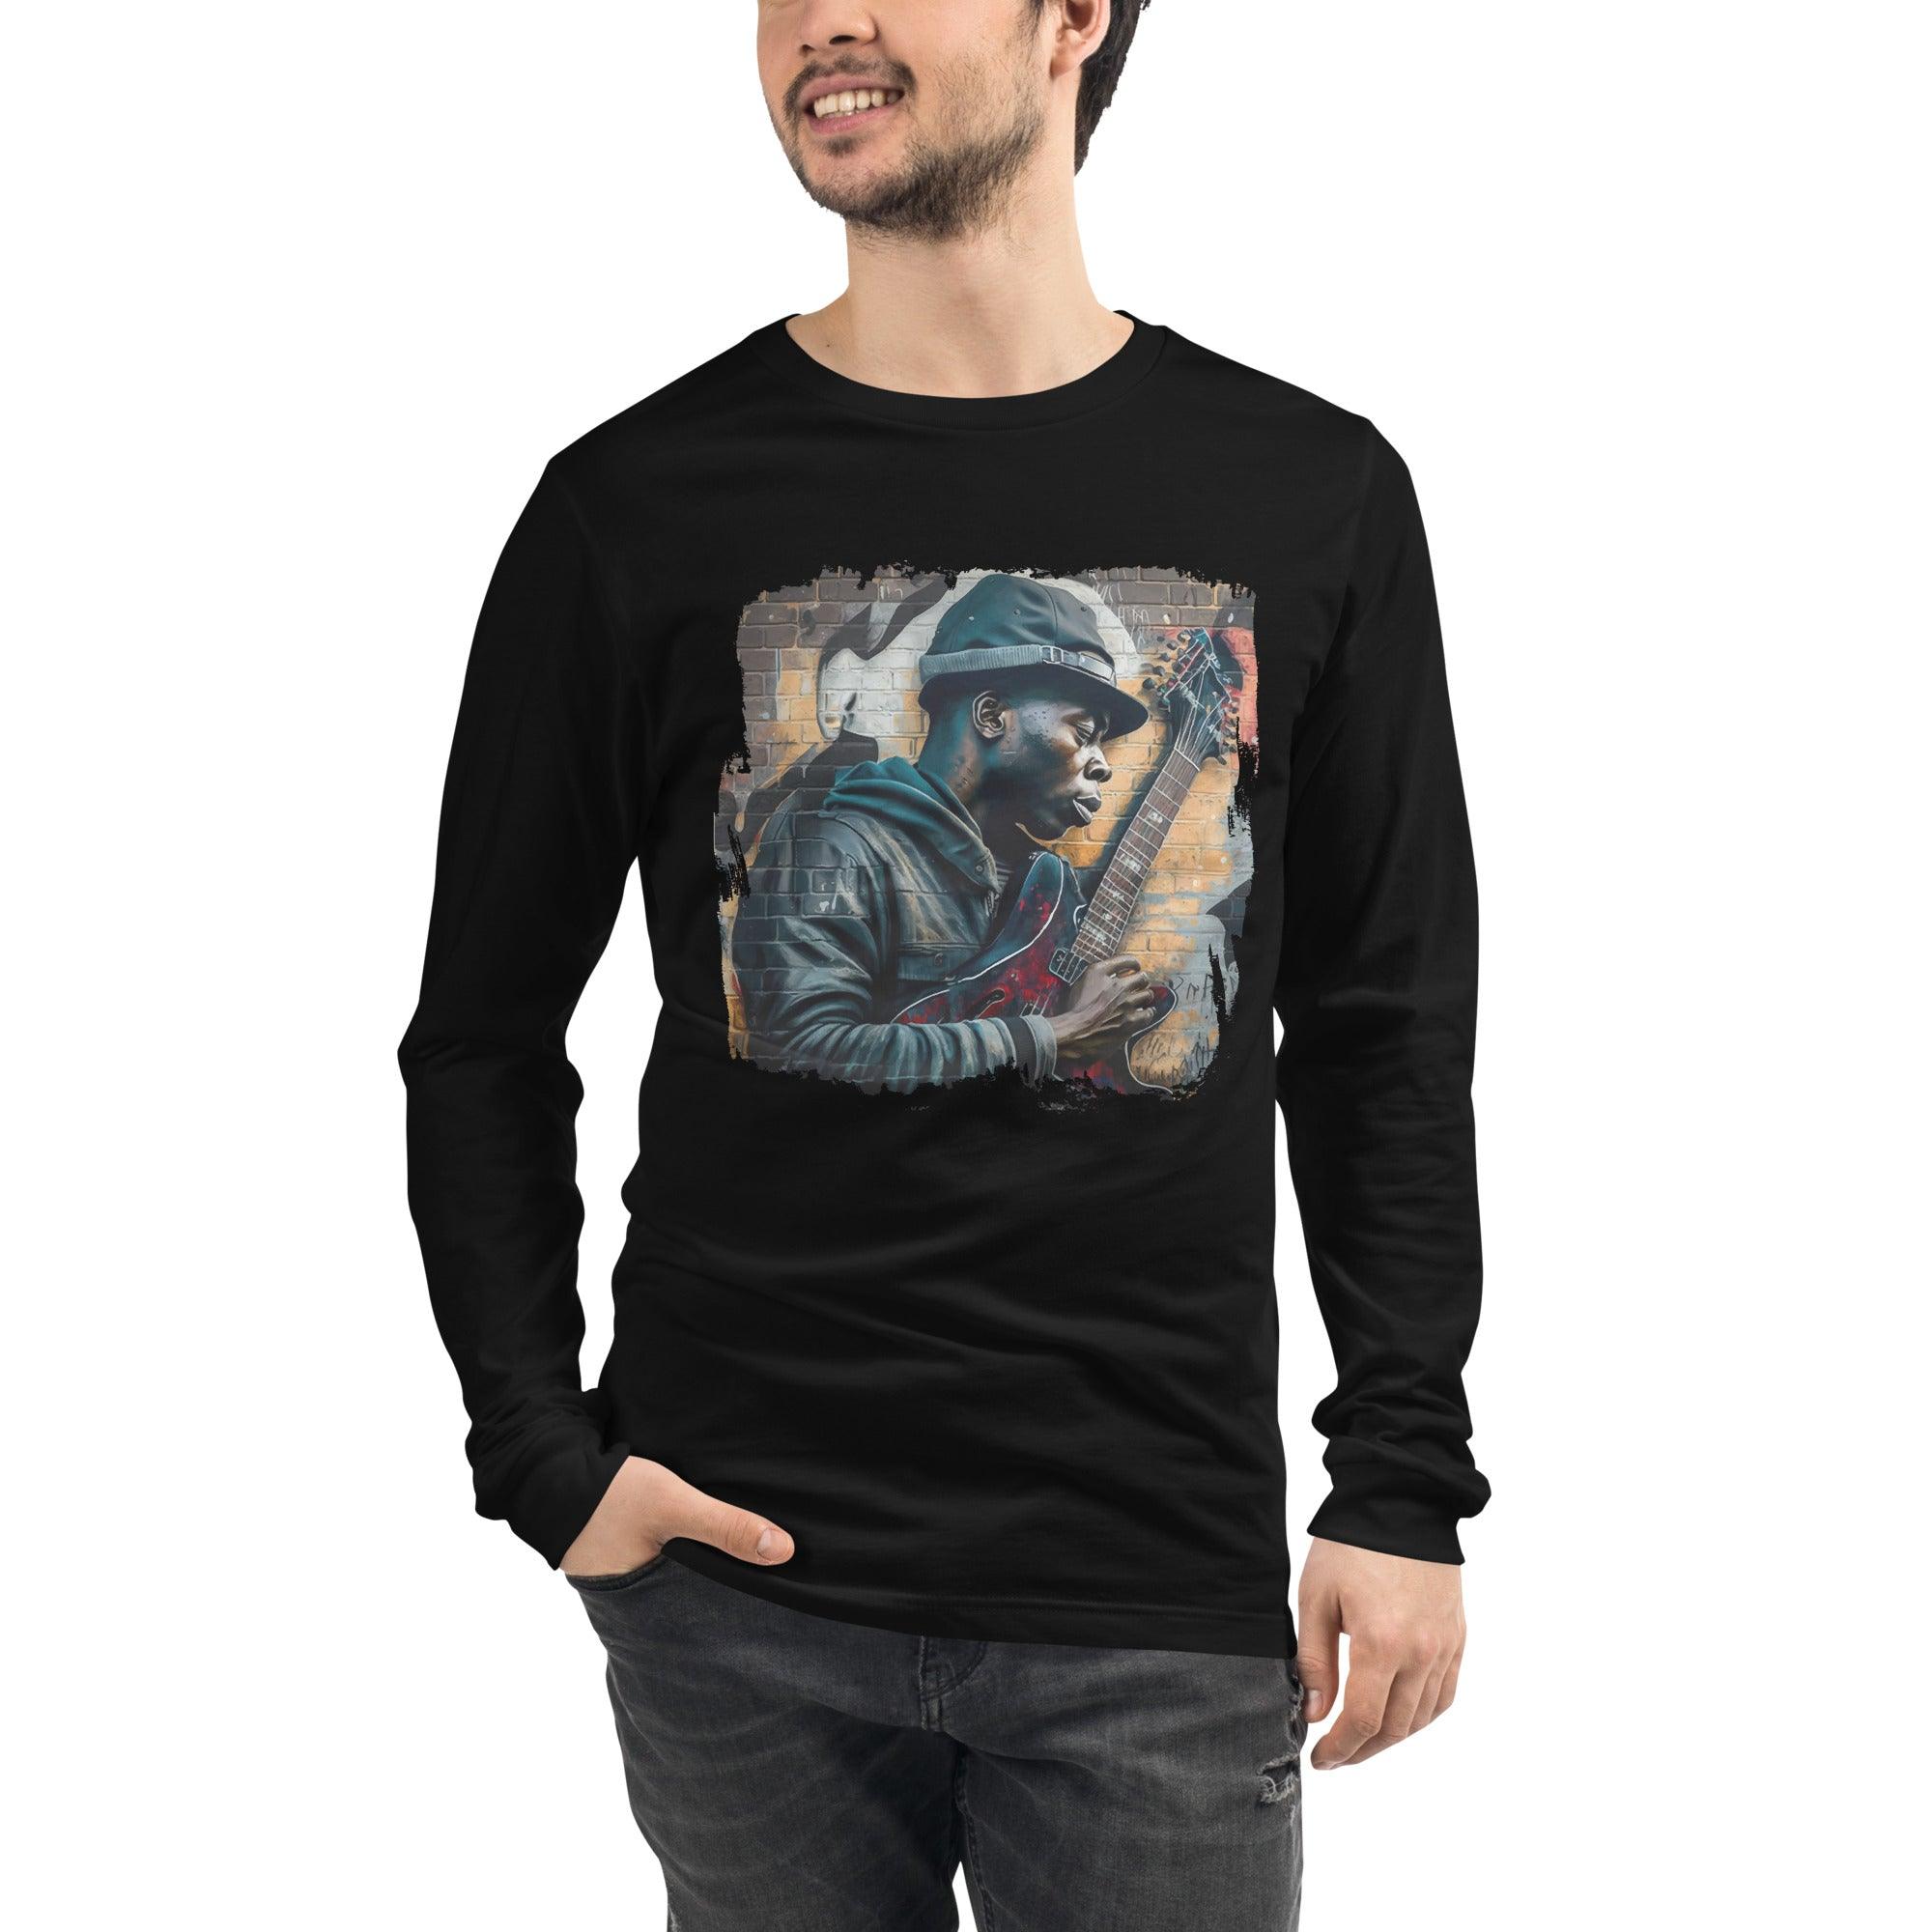 Rocking Out, Feeling Alive Unisex Long Sleeve Tee - Beyond T-shirts